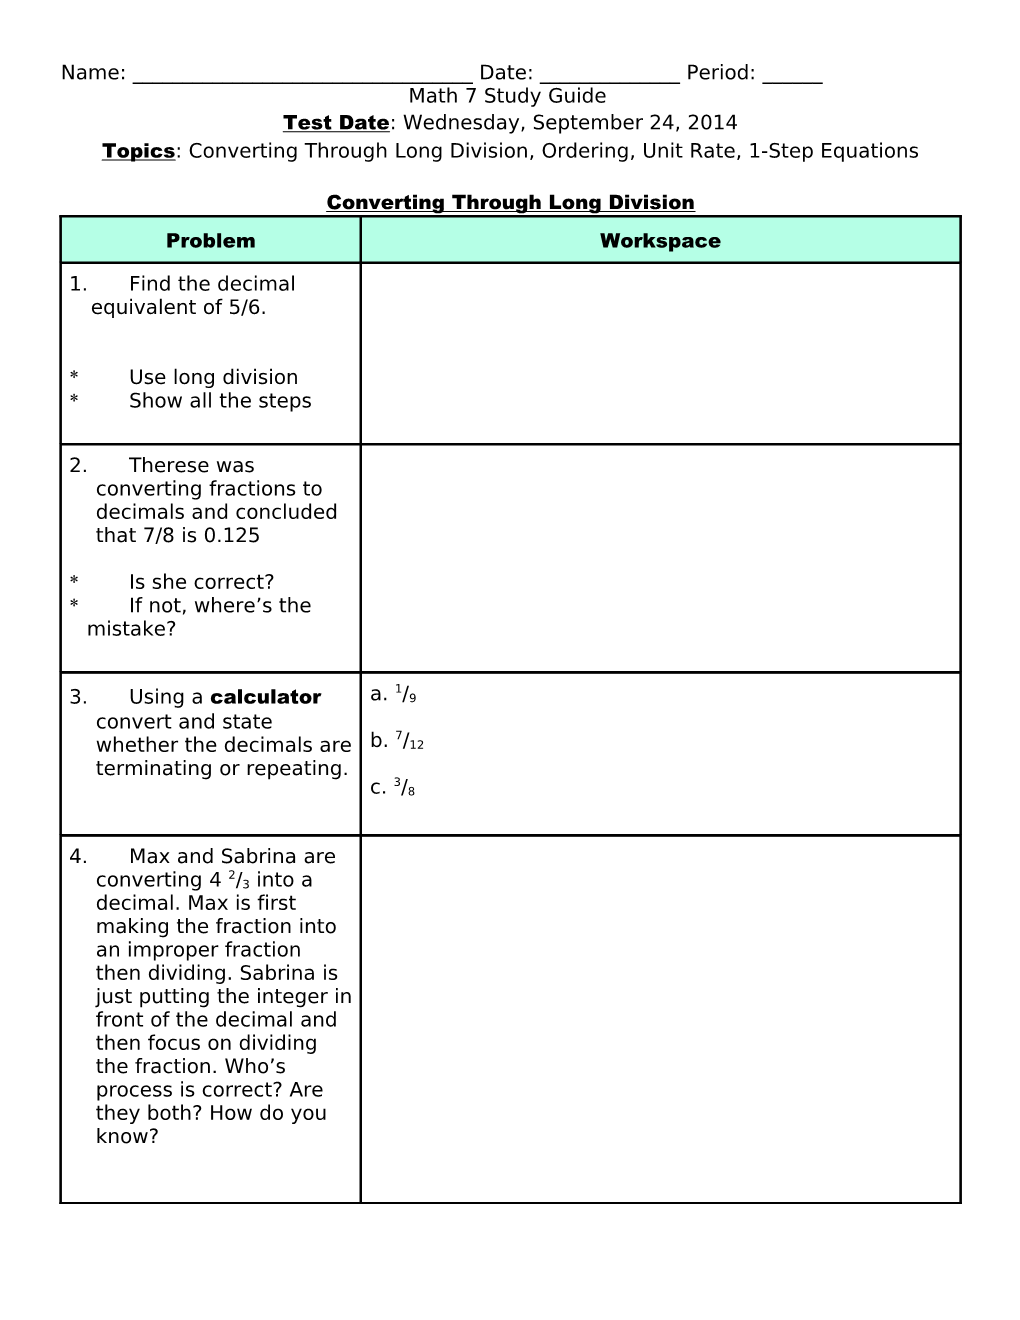 Topics: Converting Through Long Division, Ordering, Unit Rate, 1-Step Equations